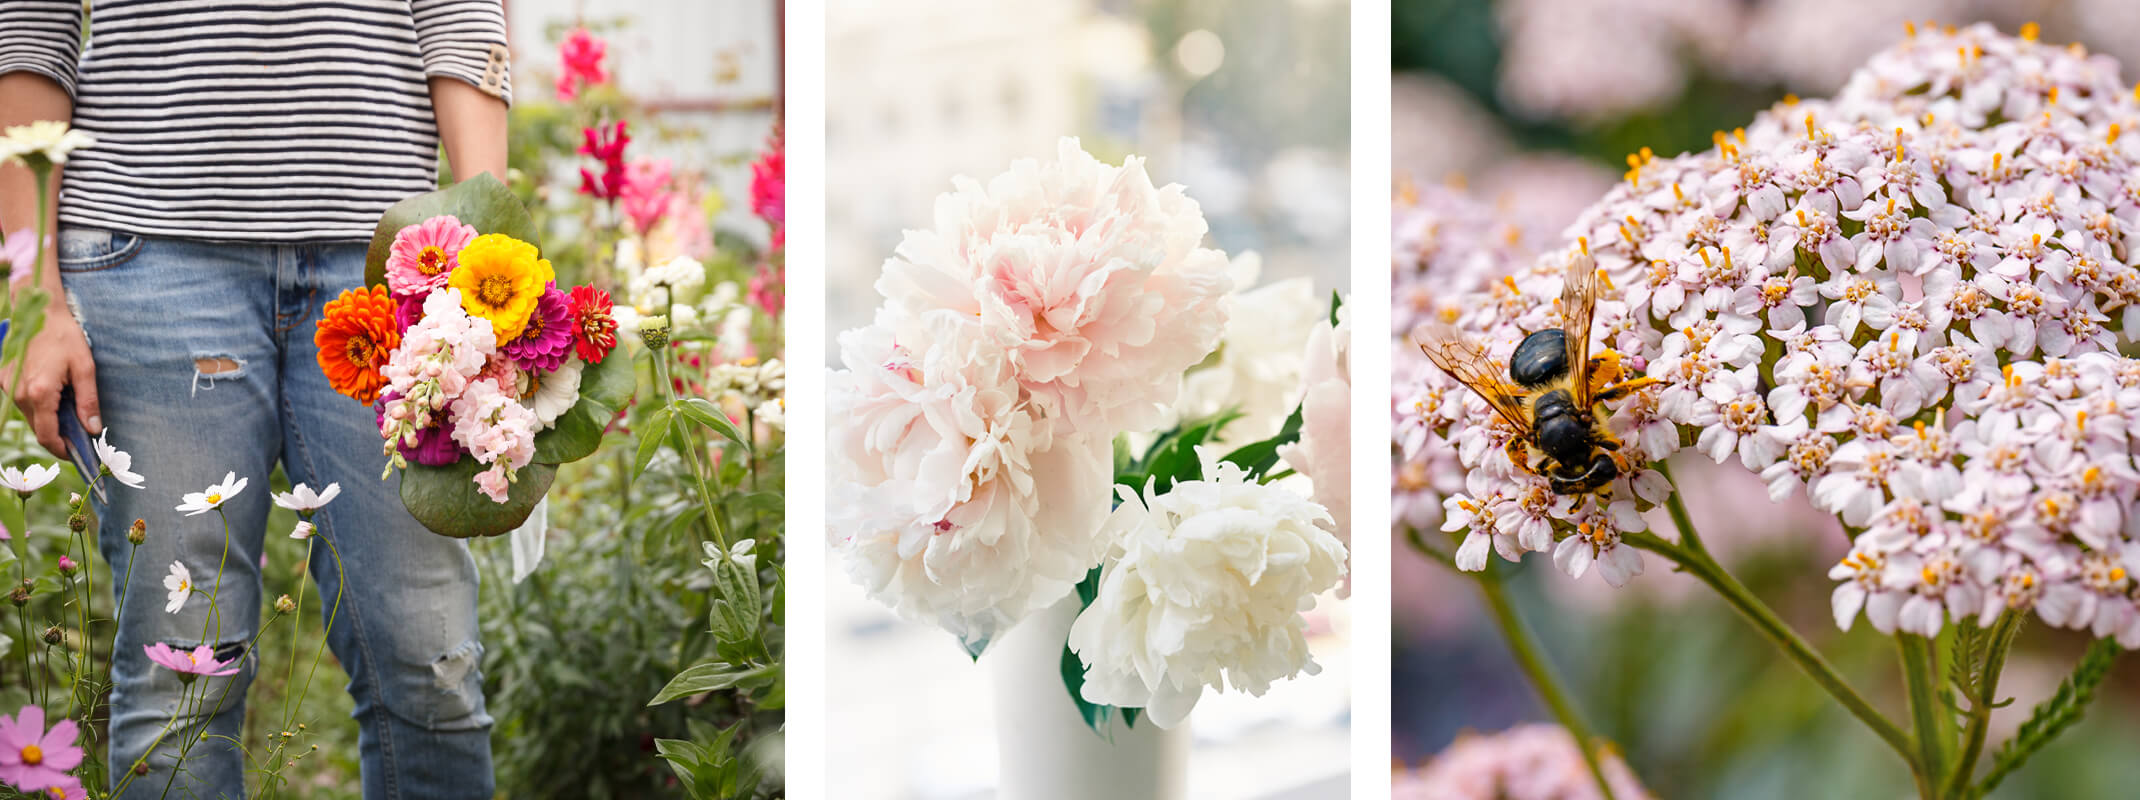 woman holding fresh cut perennials fresh cut peonies in white vase and light pink yarrow